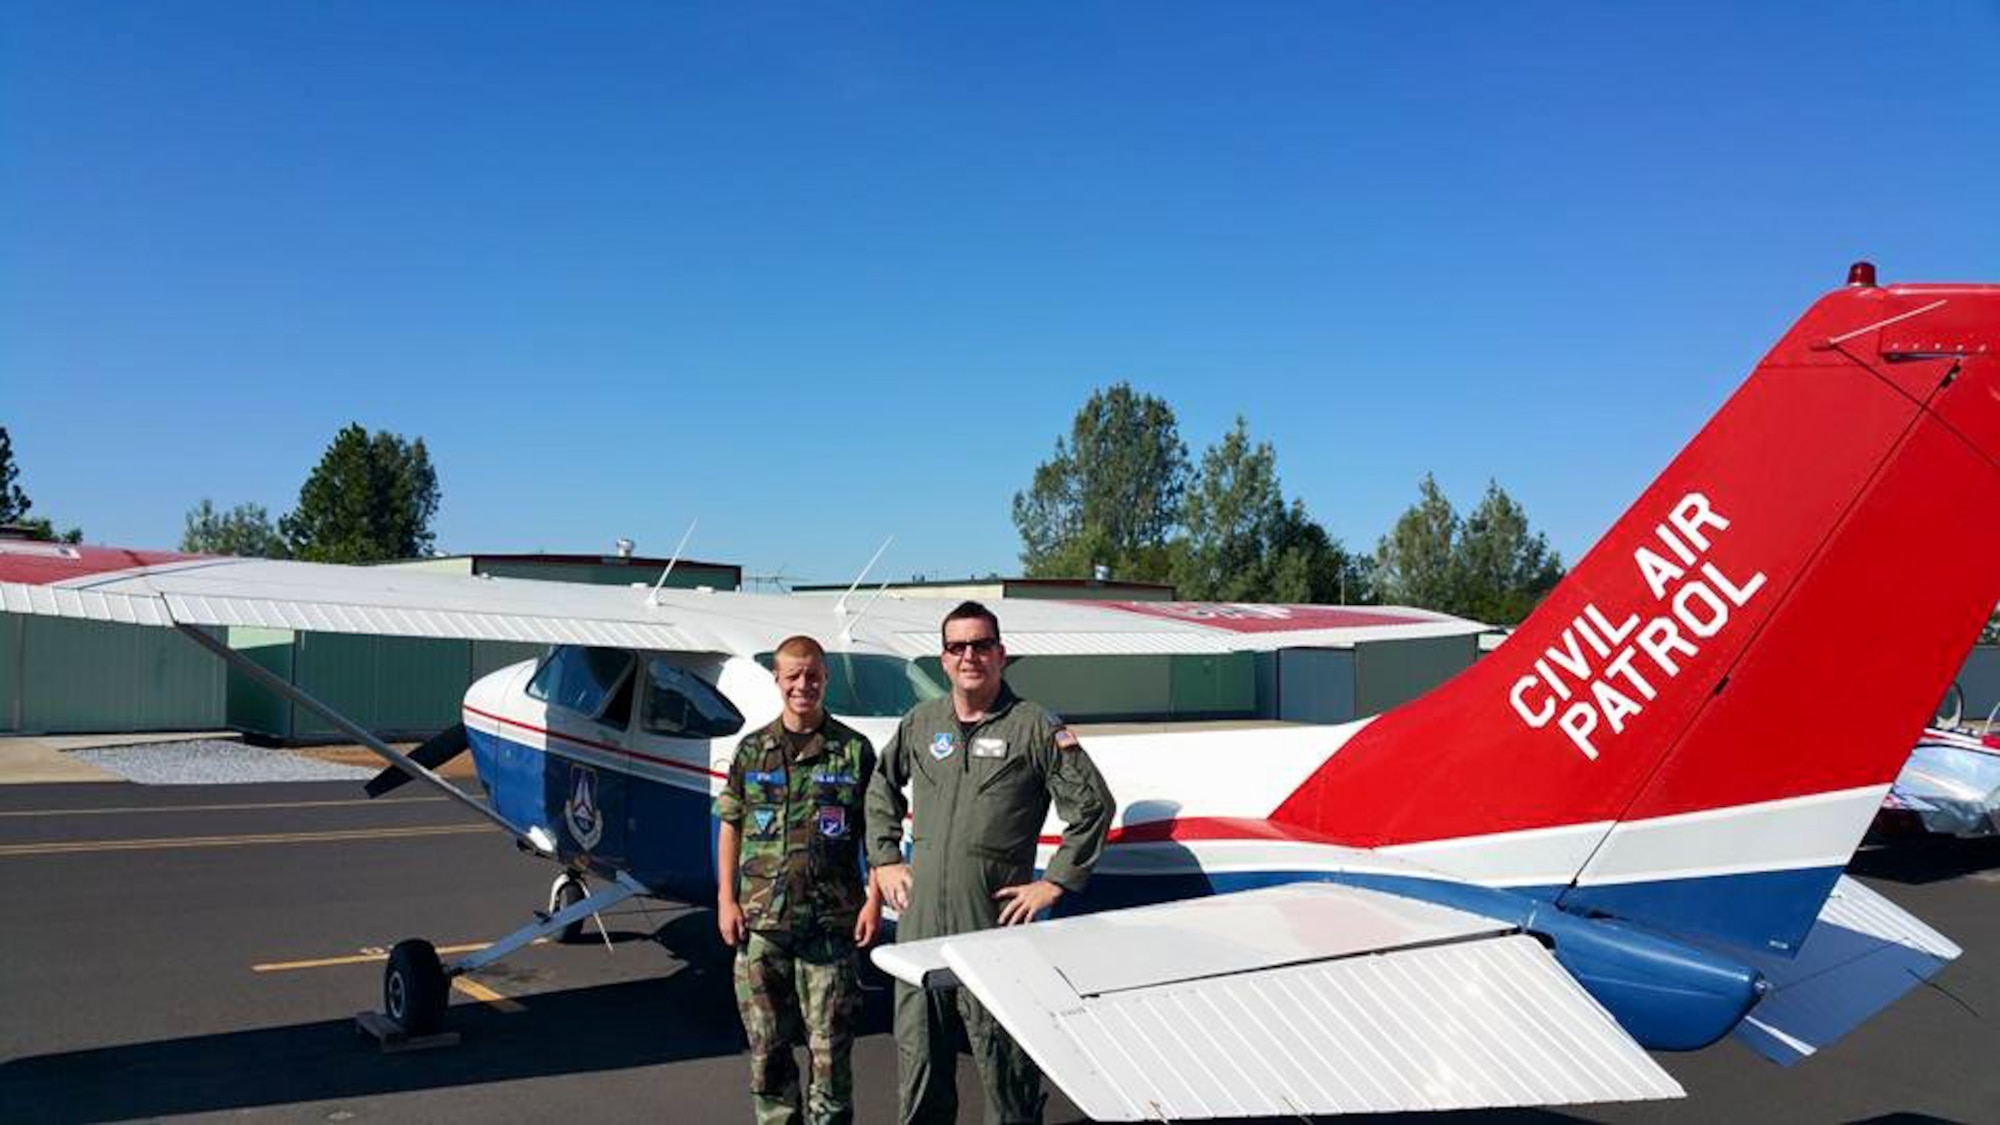 Staff Sgt. Daniel Stein (right), 8th Expeditionary Air Mobility Squadron crew chief and his son Gregory (left), a Civil Air Patrol cadet. Gregory fractured his C-1 vertebrae in a severe all-terrain vehicle accident in November. He was flown to Sutter Health Roseville Medical Center in Roseville, California where he spent nine days in the Neuro-Intensive Care Unit. (U.S. Air Force photo courtesy of Staff Sgt. Daniel Stein)